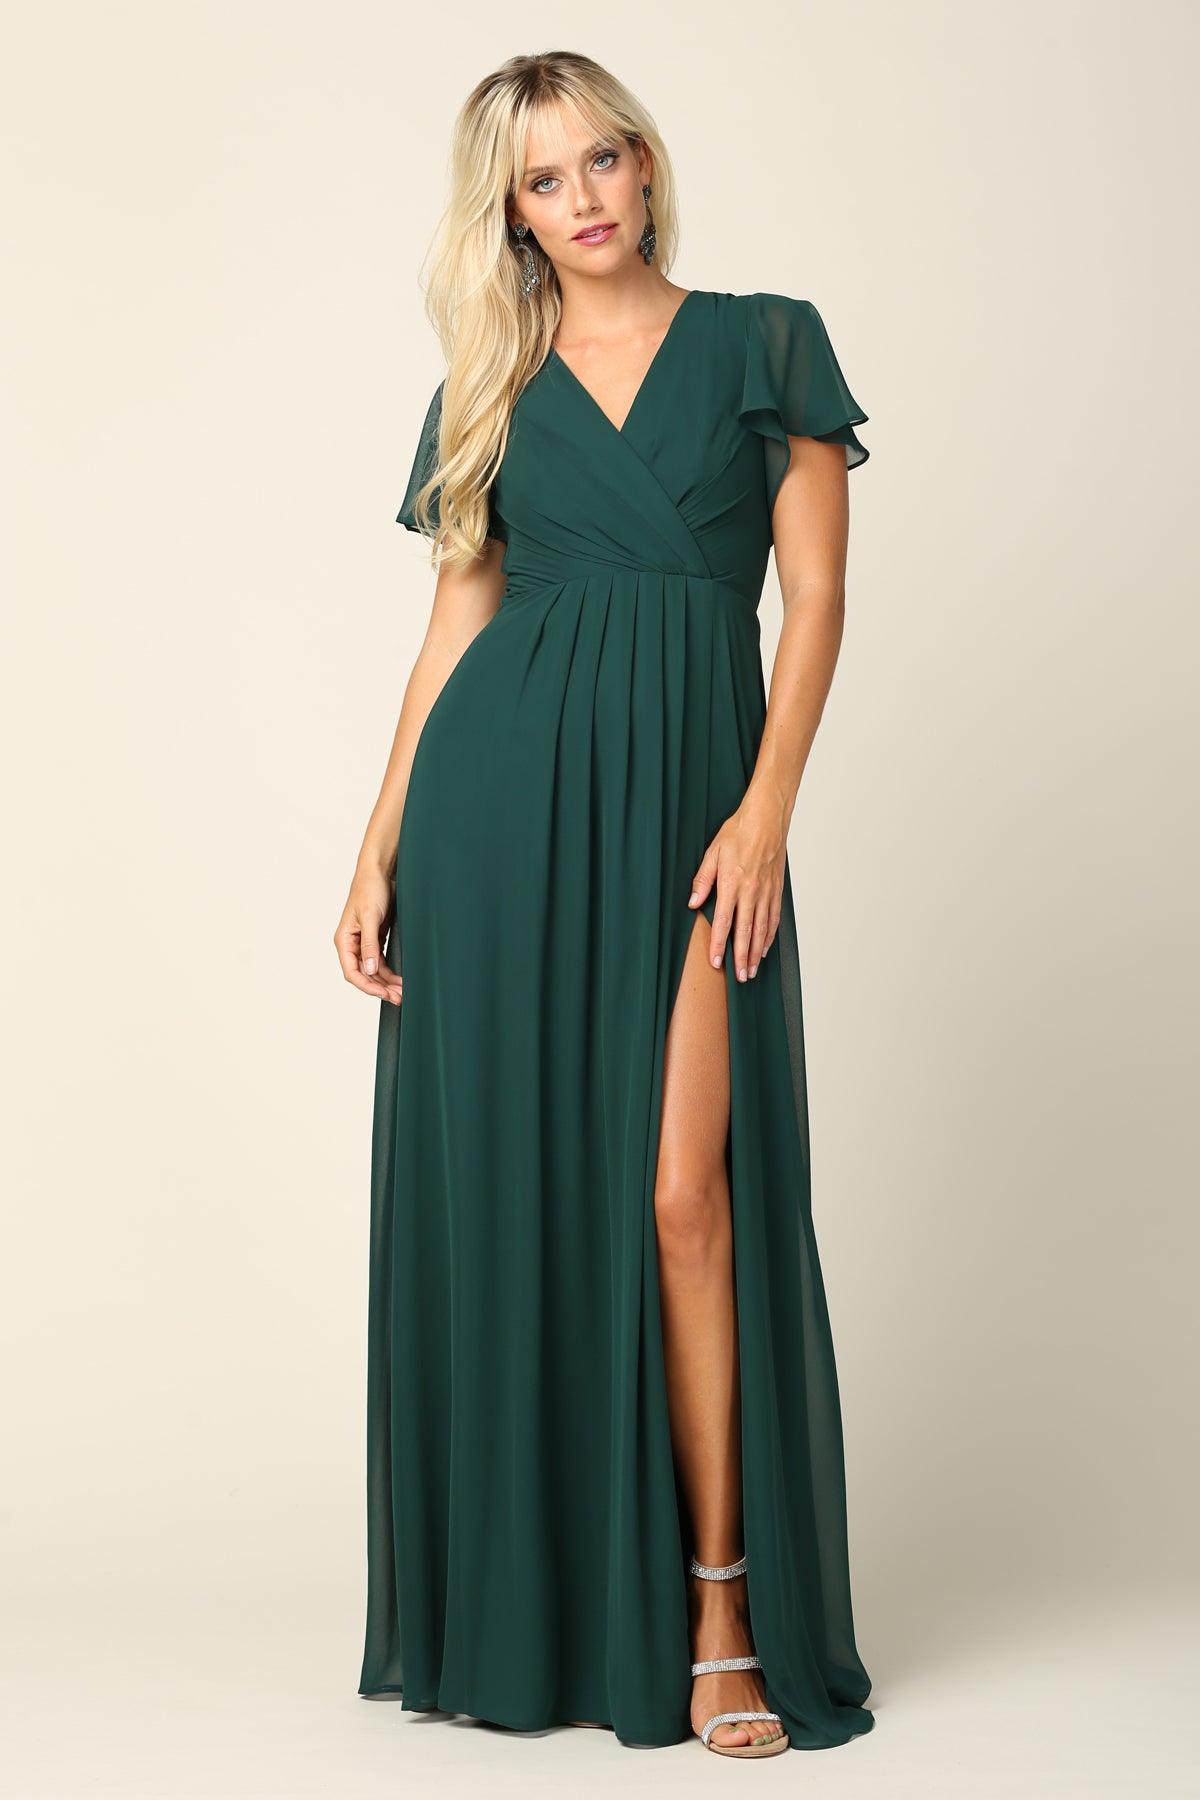 Long Short Sleeve Mother of the Bride Chiffon Dress - The Dress Outlet